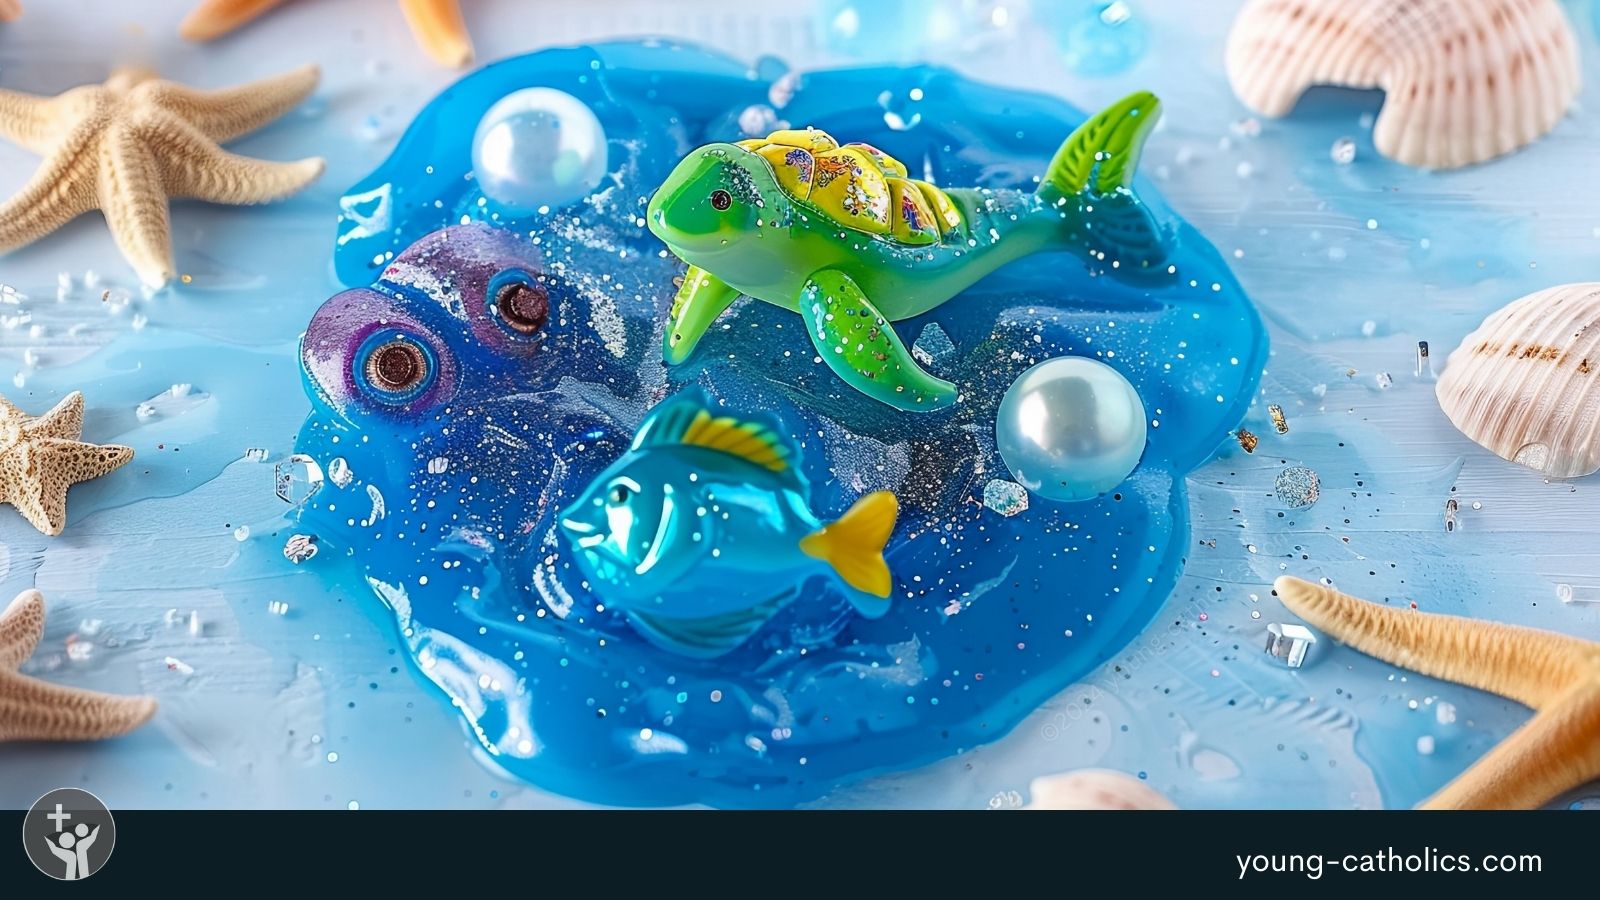 Sea Slime (for VBS or Youth Ministry)